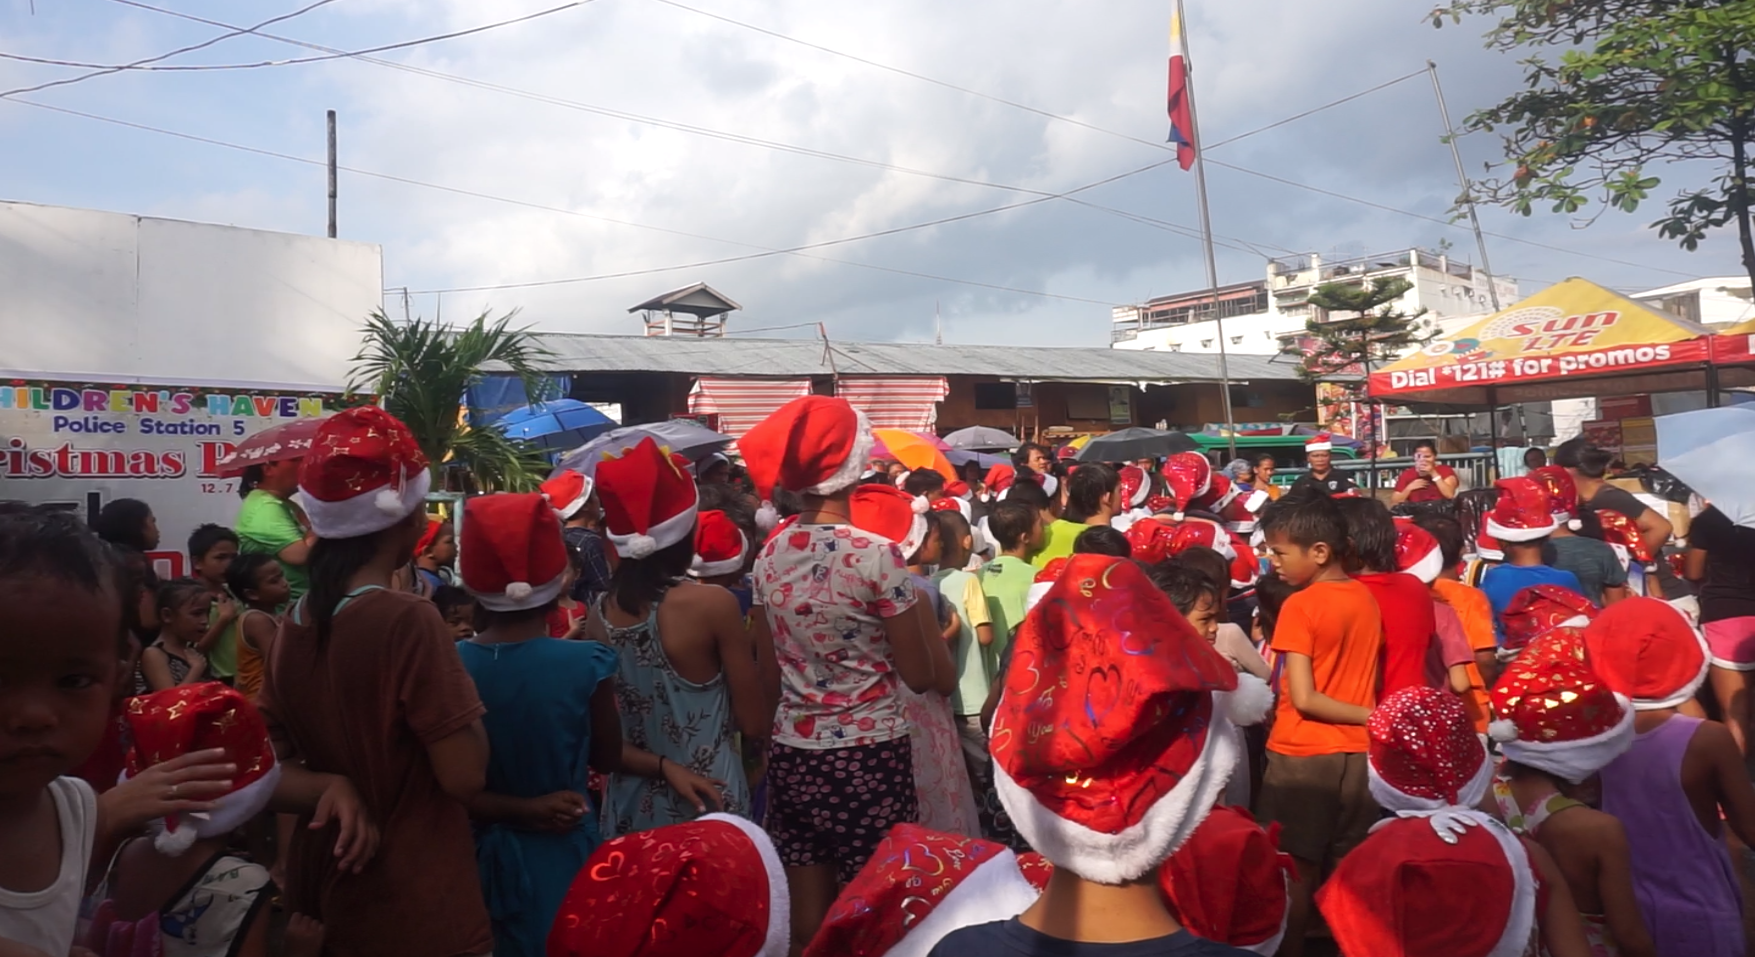 Cebu City councilor urges DepEd, CHED: Implement safety measures for Christmas parties | Cebu Daily News